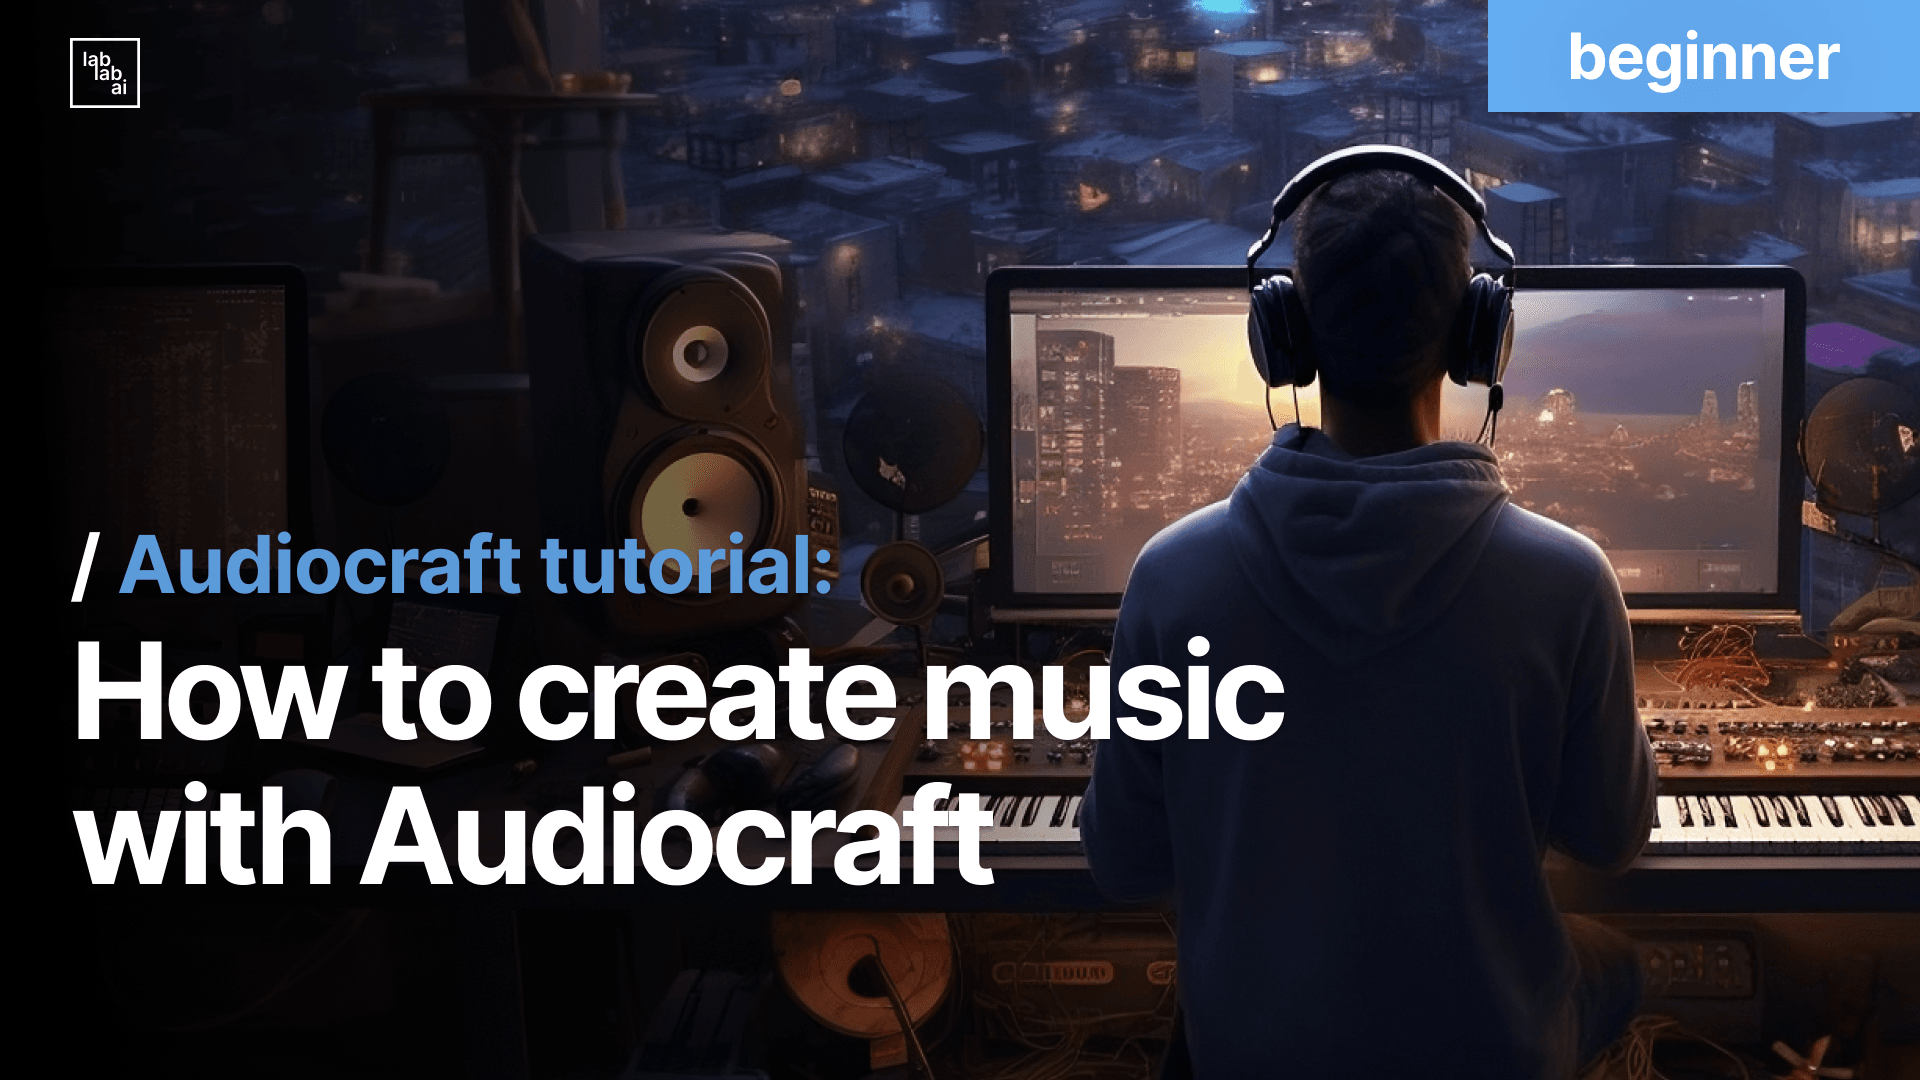 Audiocraft tutorial: How to create music with Audiocraft